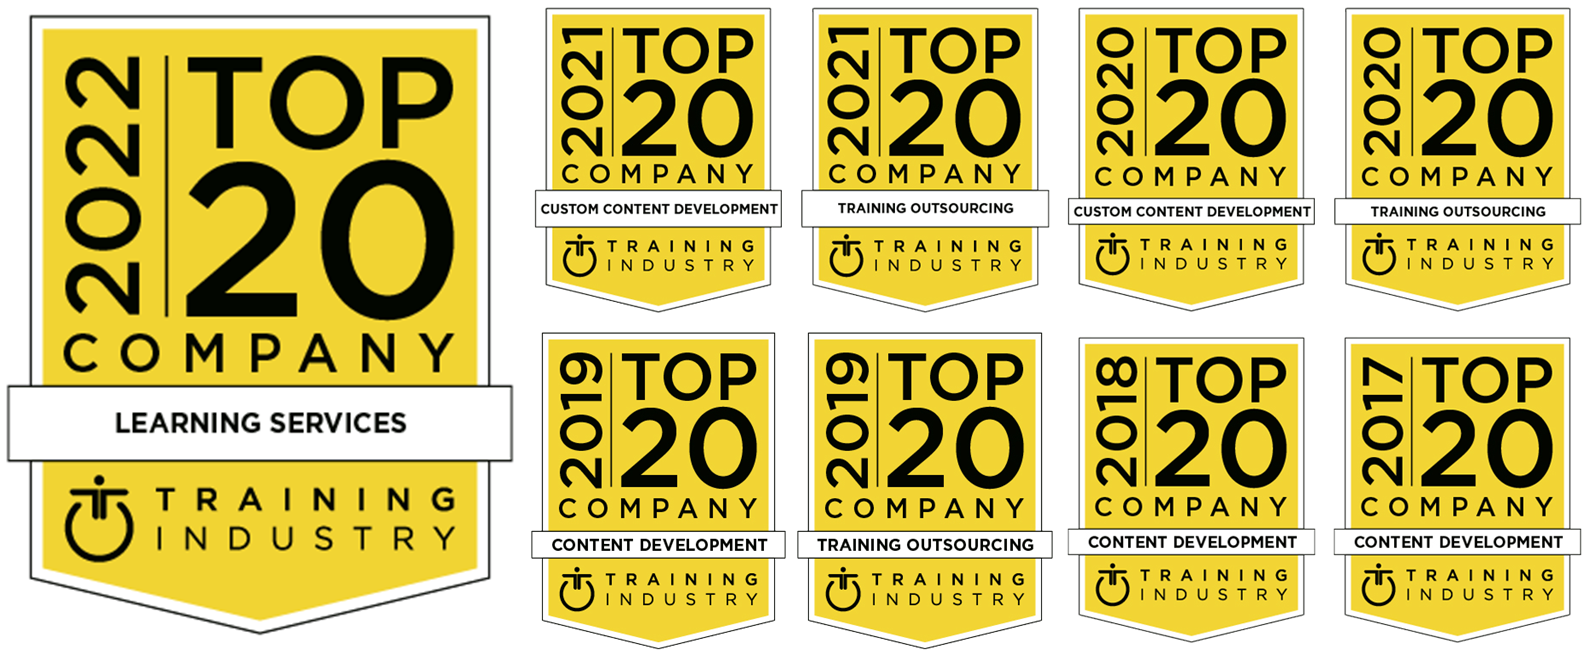 Awards from Training Industry 2017 through 2022